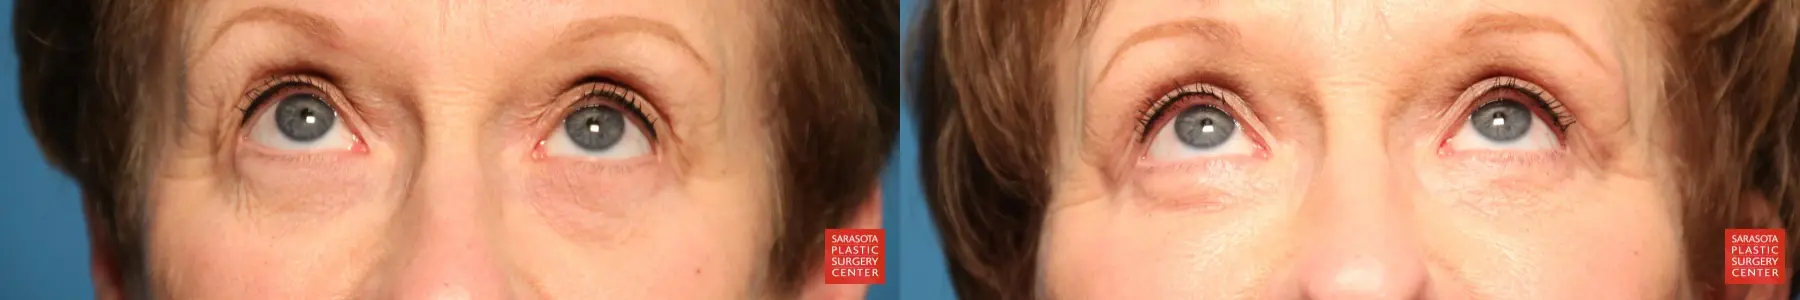 Eyelid Lift: Patient 21 - Before and After 2